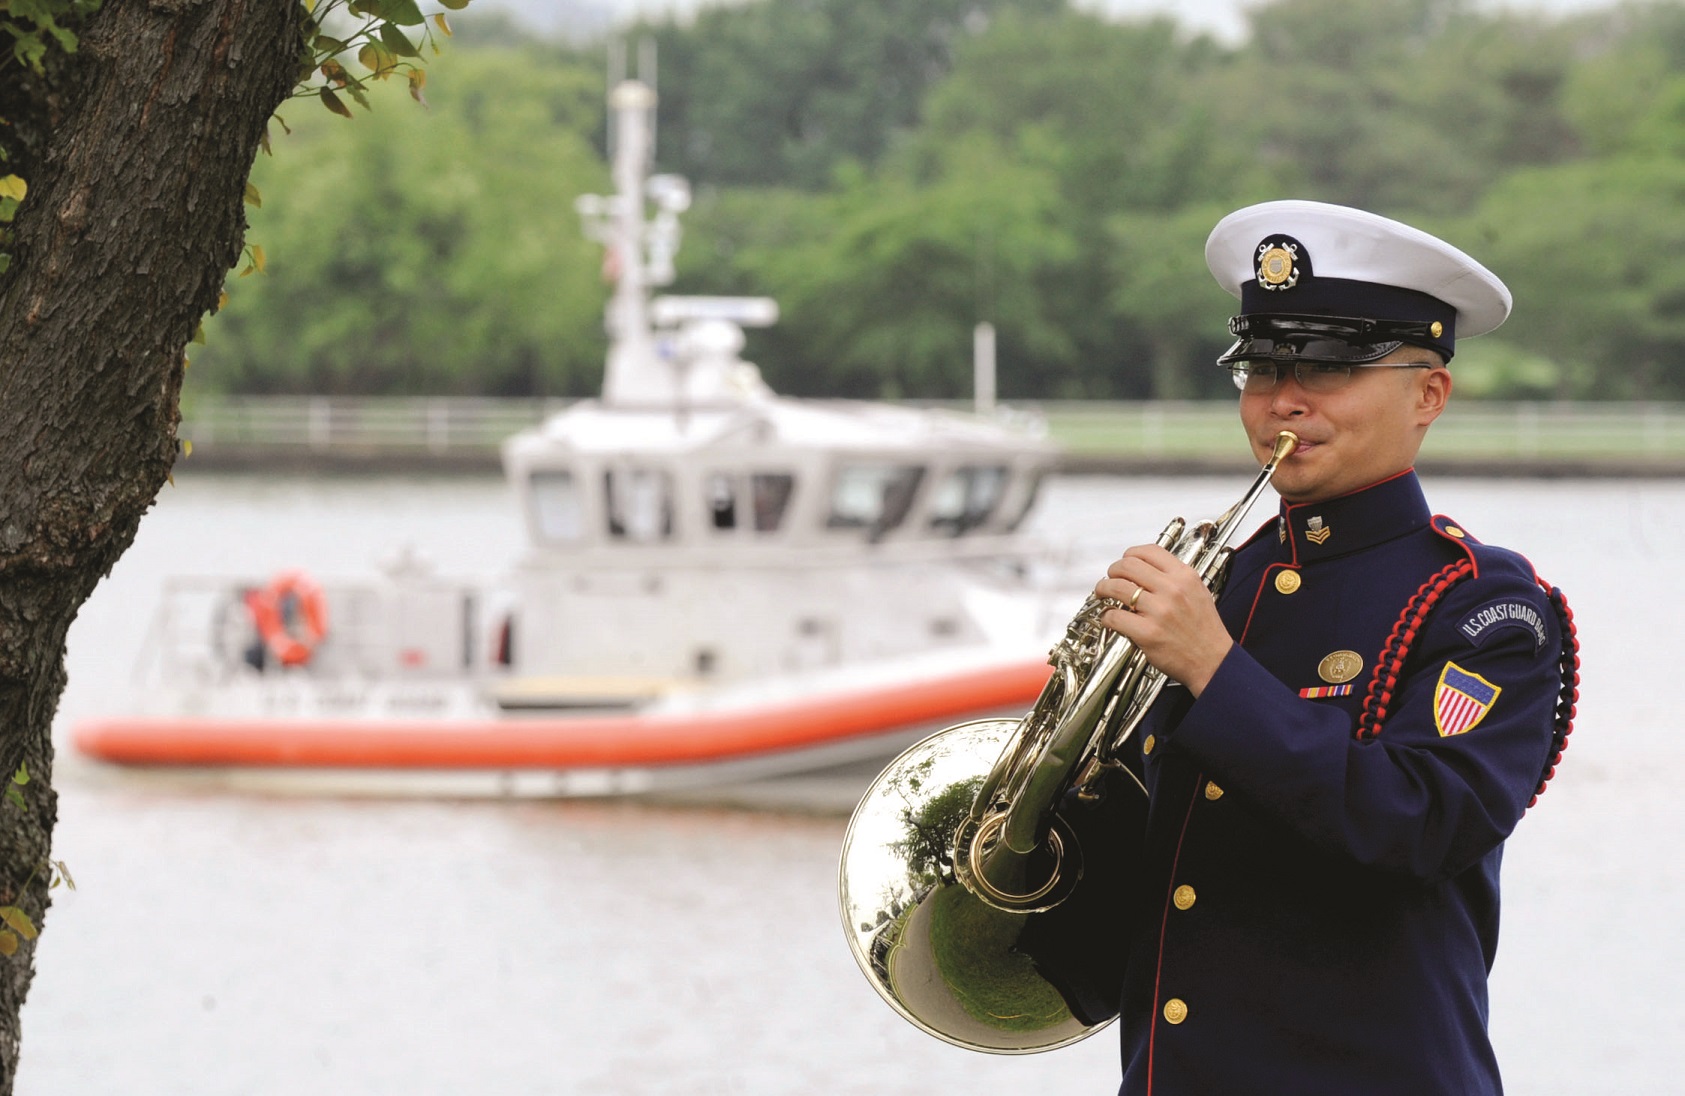 The copyright and licenses of “Semper Paratus” are held by three separate companies, and the U.S. Coast Guard Band pays $175 for the privilege to record it. A U.S. Coast Guard Band member warms up as a boat patrols the Potomac River near Fort Lesley McNair in Washington, D.C., May 25, 2010. (DoD photo by Cherie Cullen)